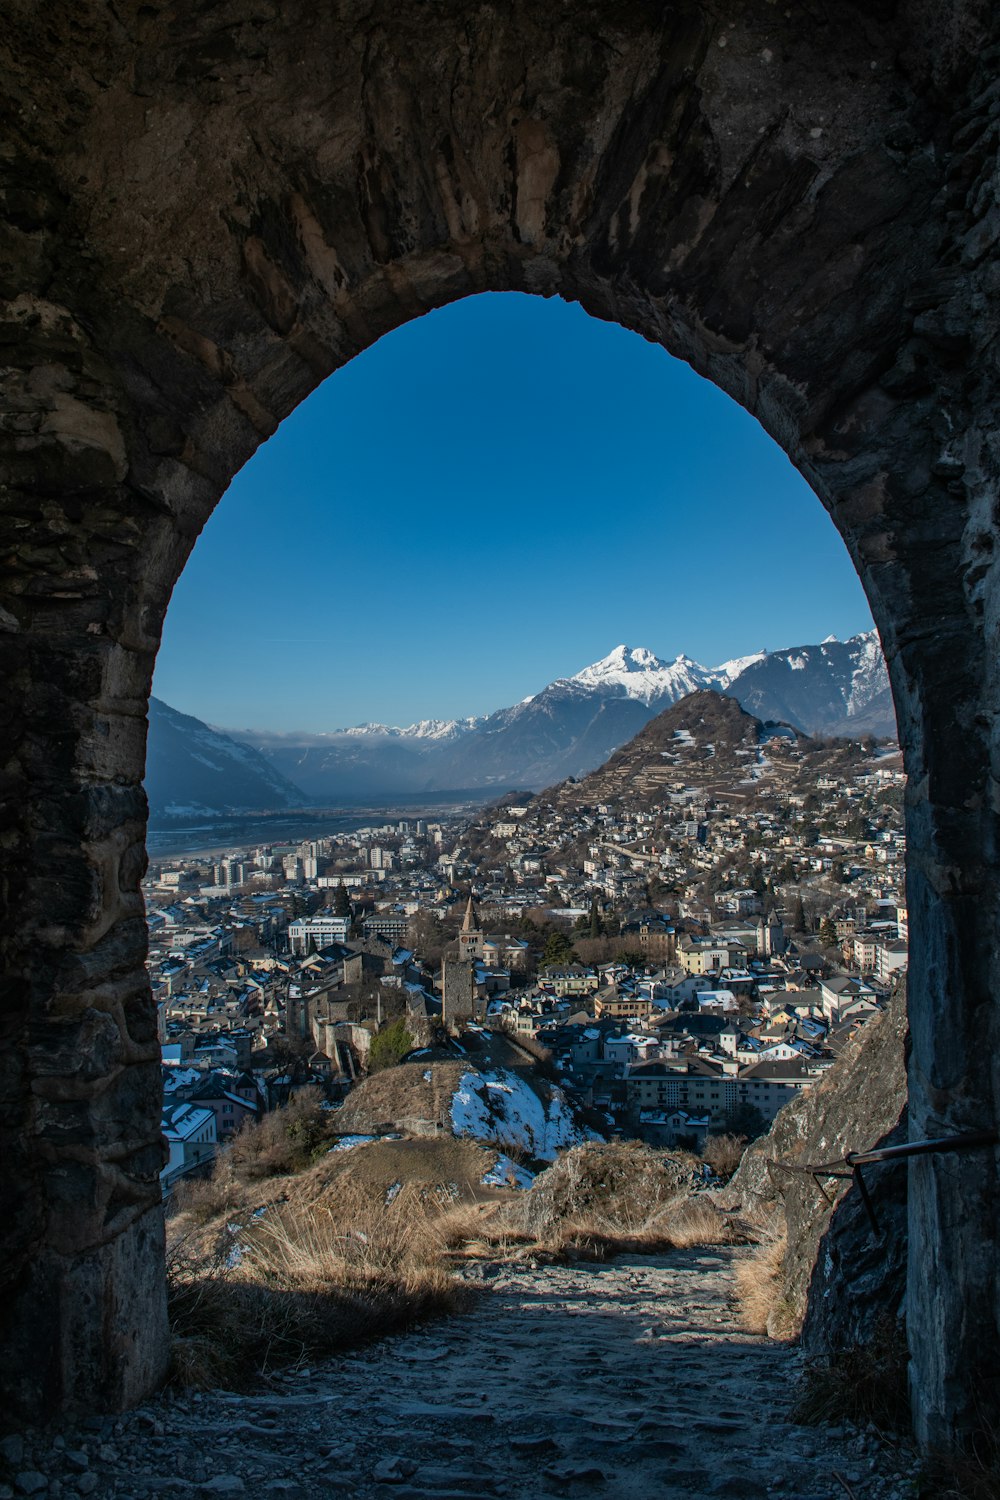 a view of a city through a stone arch